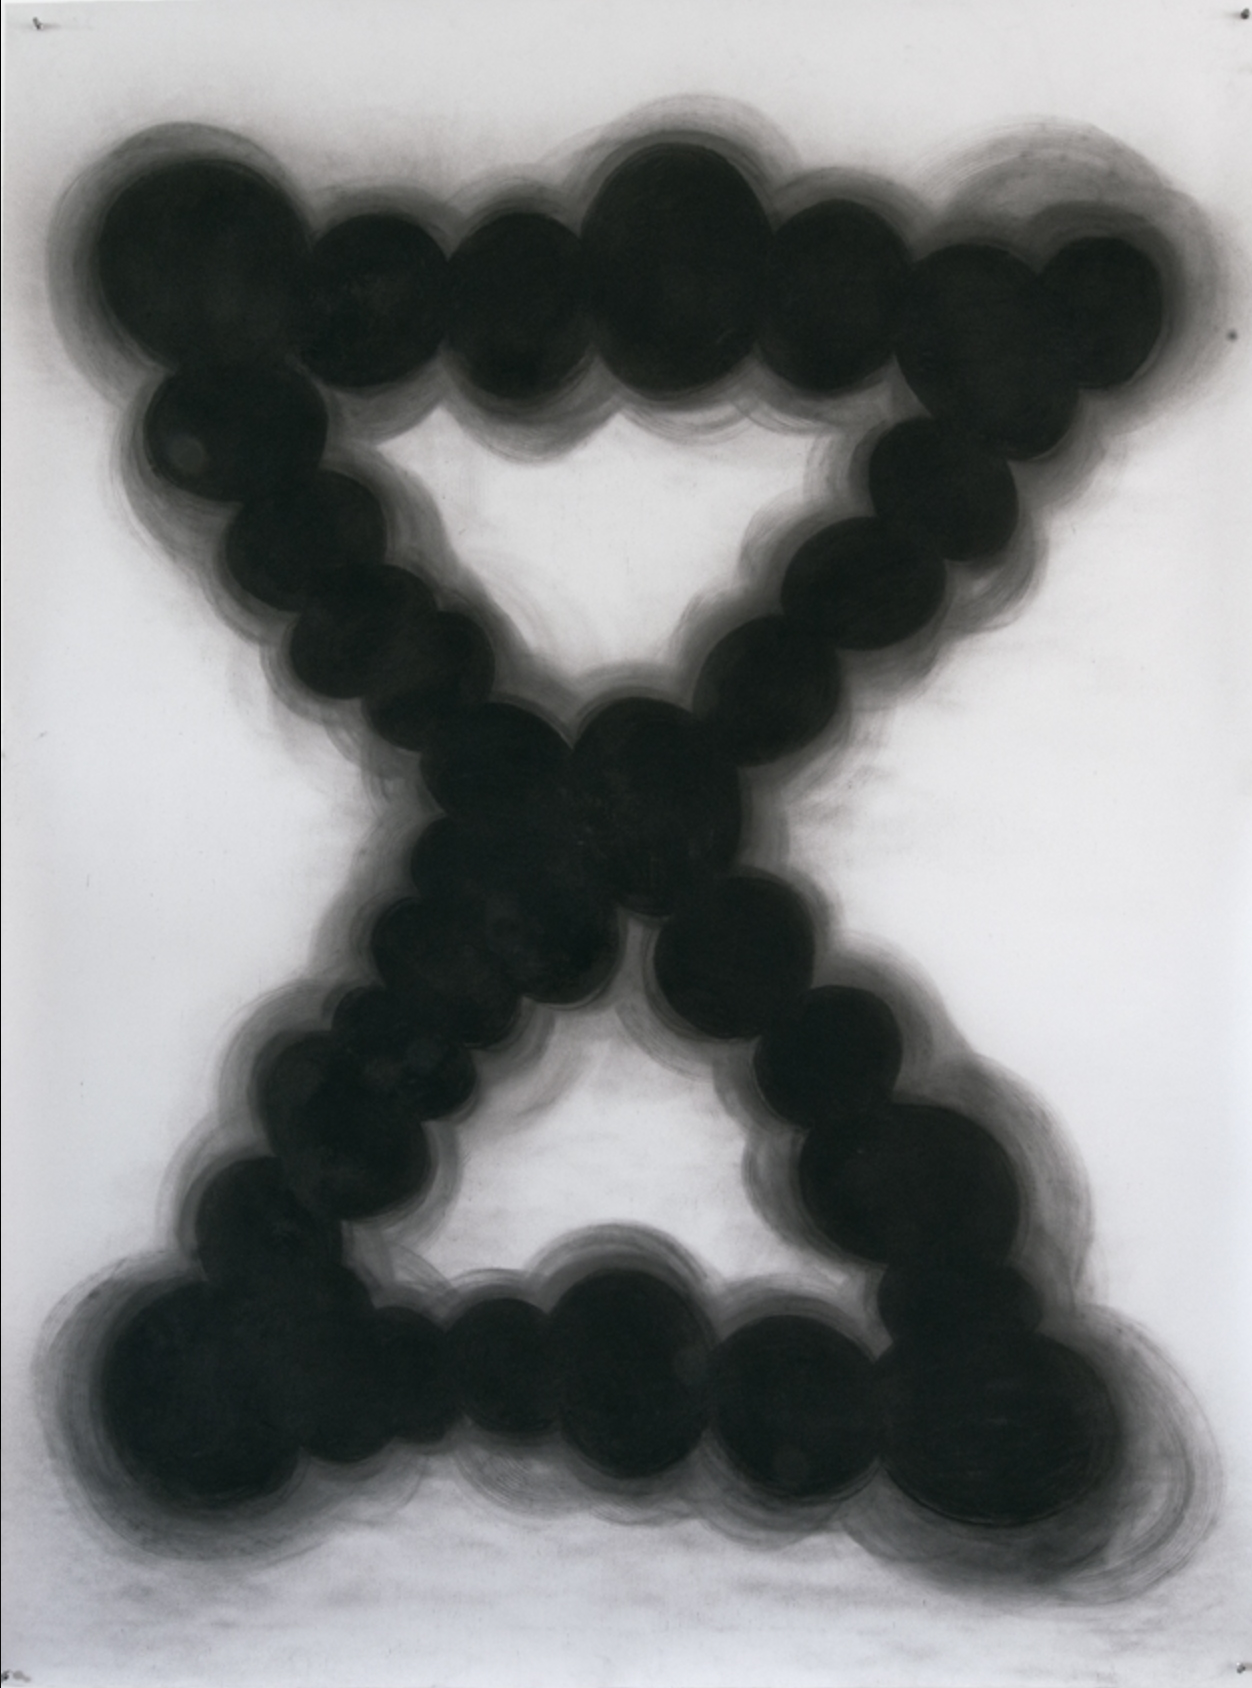 drawing Riette Wanders - untitled, 2015 / charcoal on paper - contemporary drawing, drawings, work on paper